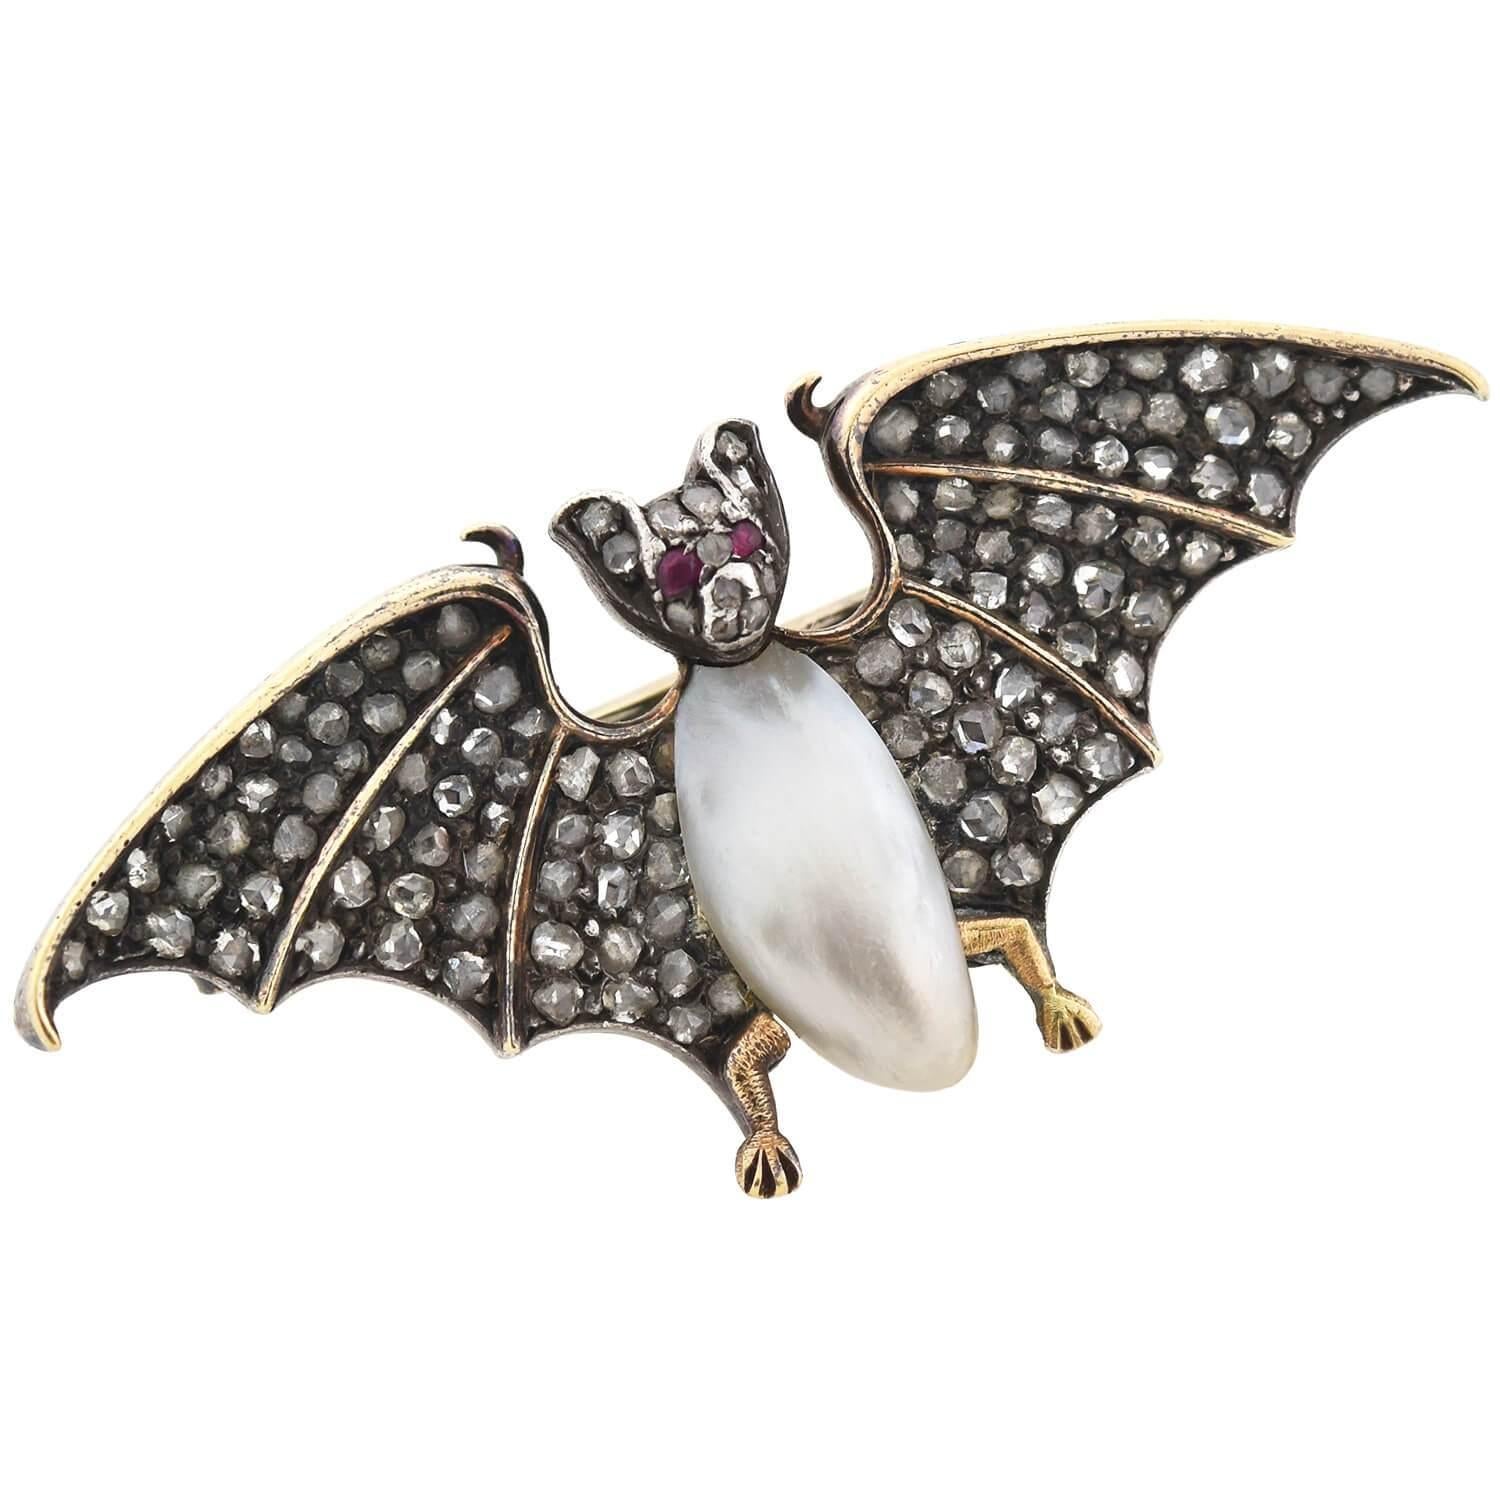 An rare and exquisite gemstone bat pin from the Victorian (ca1880) era! Crafted in 18kt yellow gold topped with sterling silver, this mixed metals piece depicts an open winged bat, which comes to life in realistic 3-dimensional detail. Its